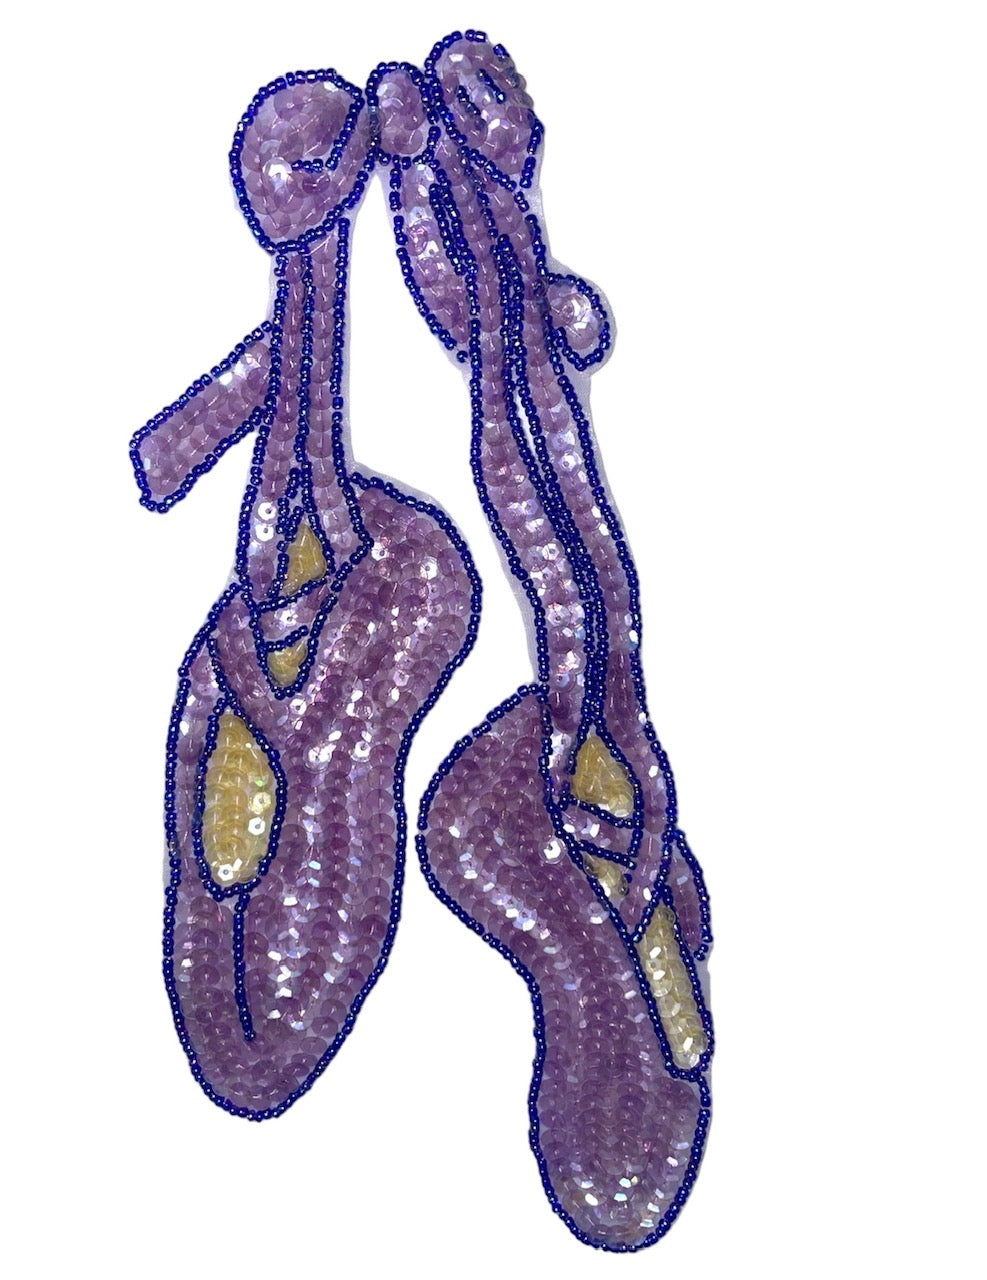 Ballet Slippers with Purple Iridescent Sequins and Beads 10